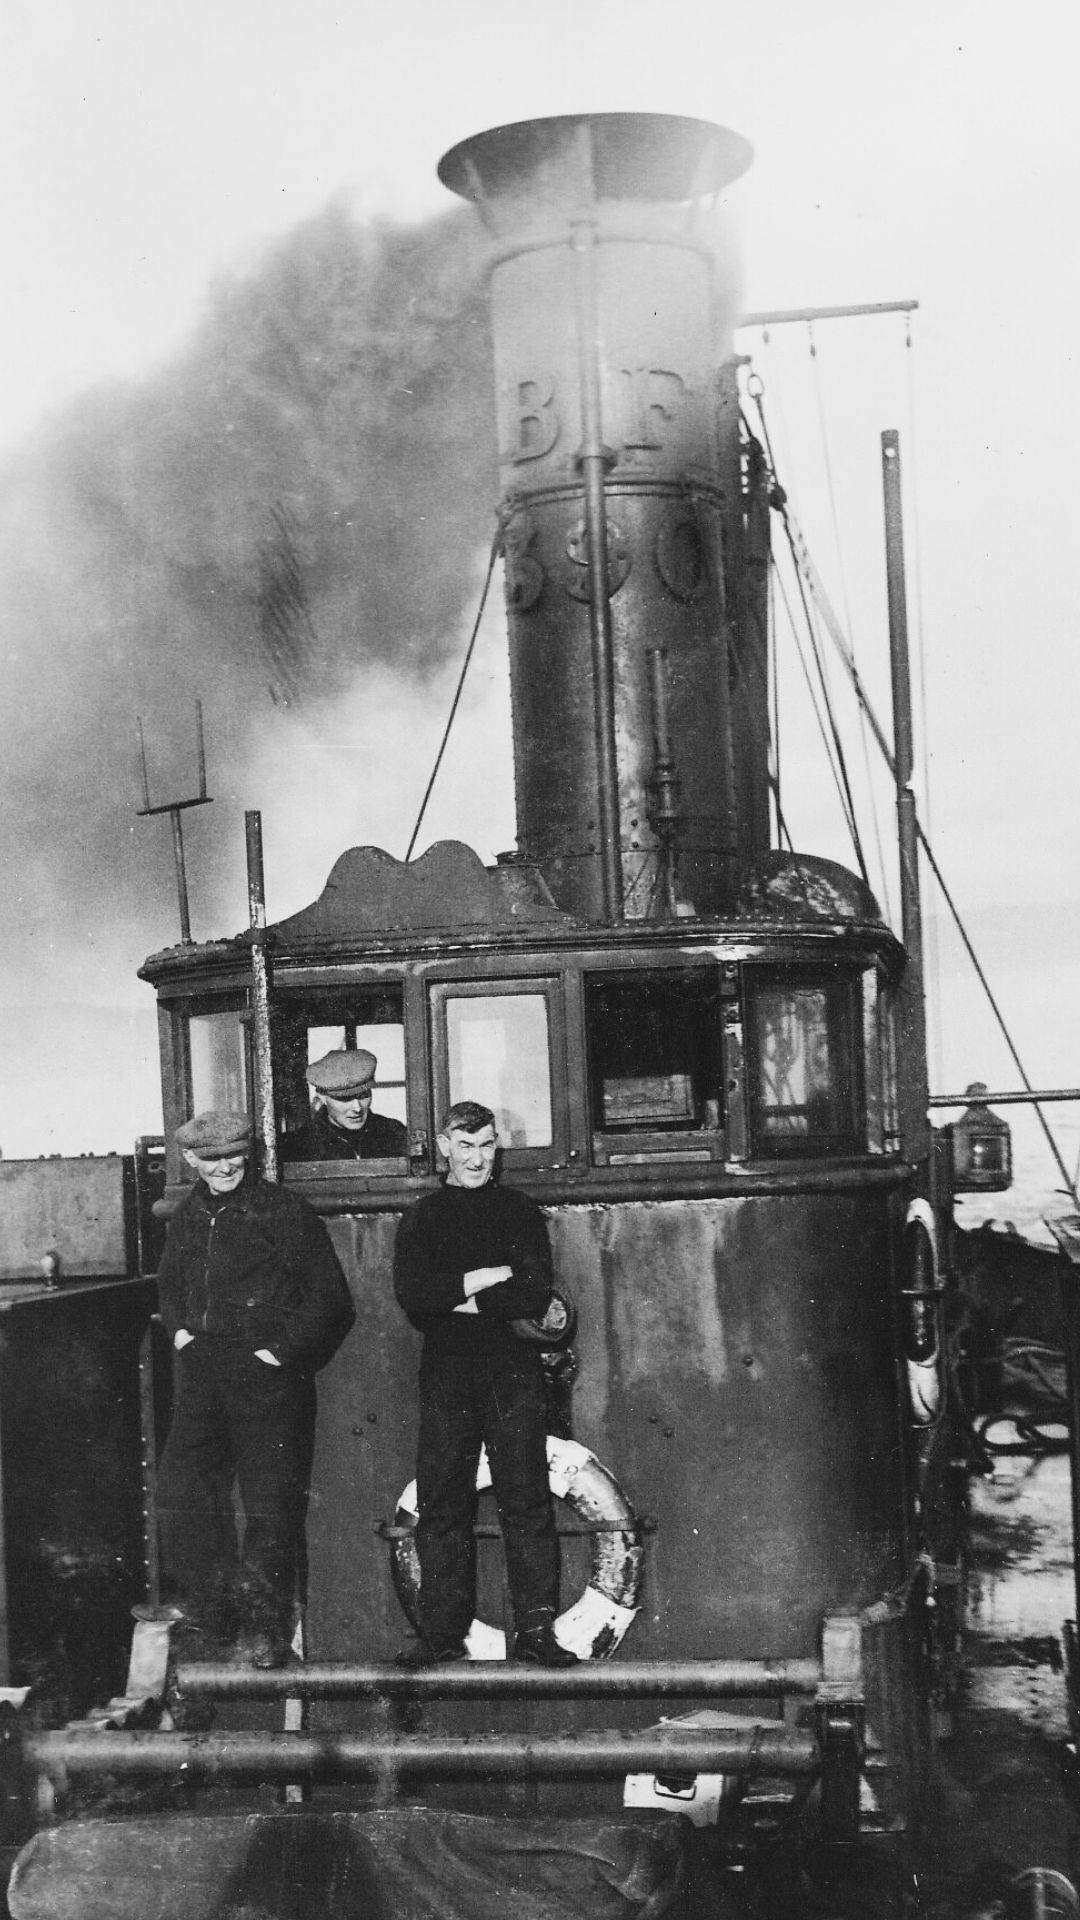 Crew members of 'Betsy Slater' in Bangor, Co. Down. The 'Betsy Slater' was requisitioned as a barrage balloon vessel on Belfast Lough.